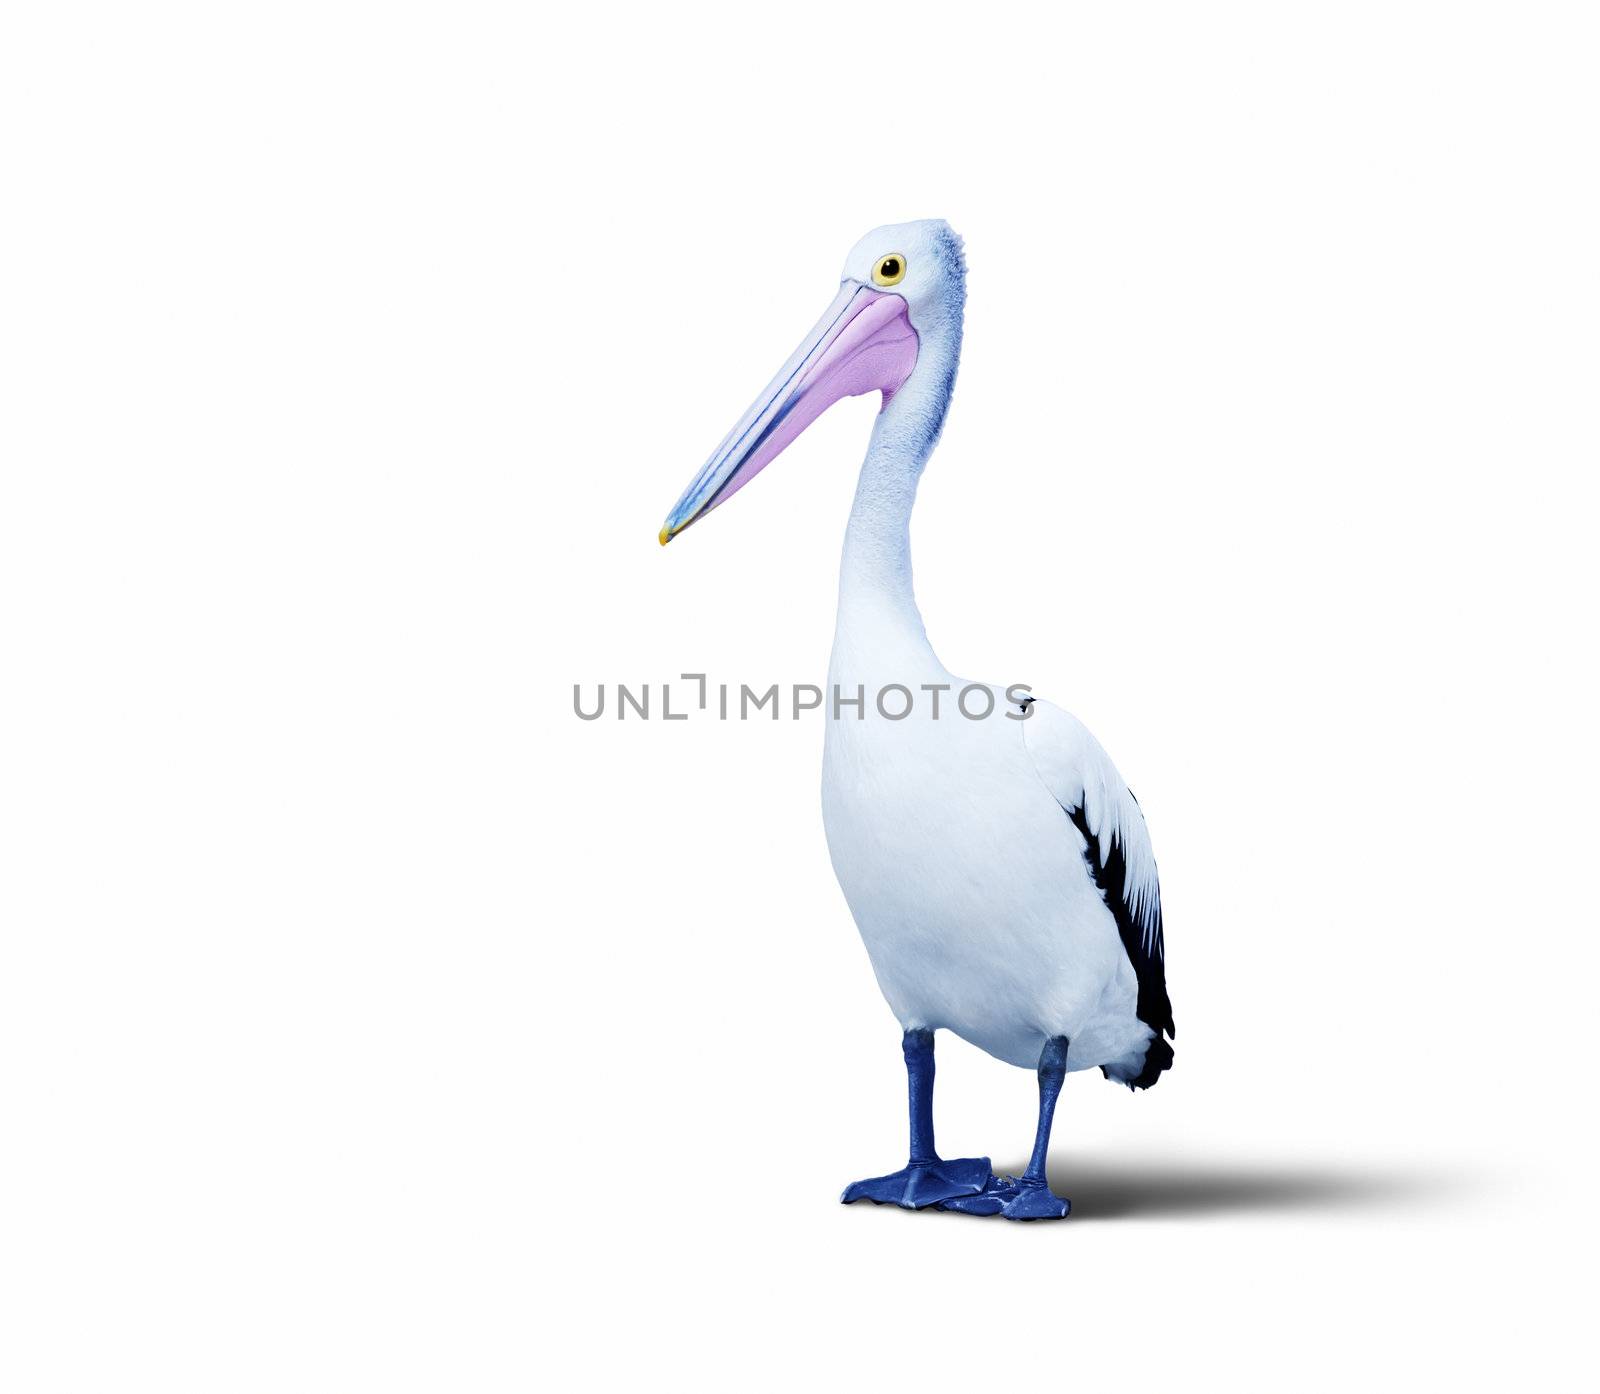 A photography of an isolated pelican bird